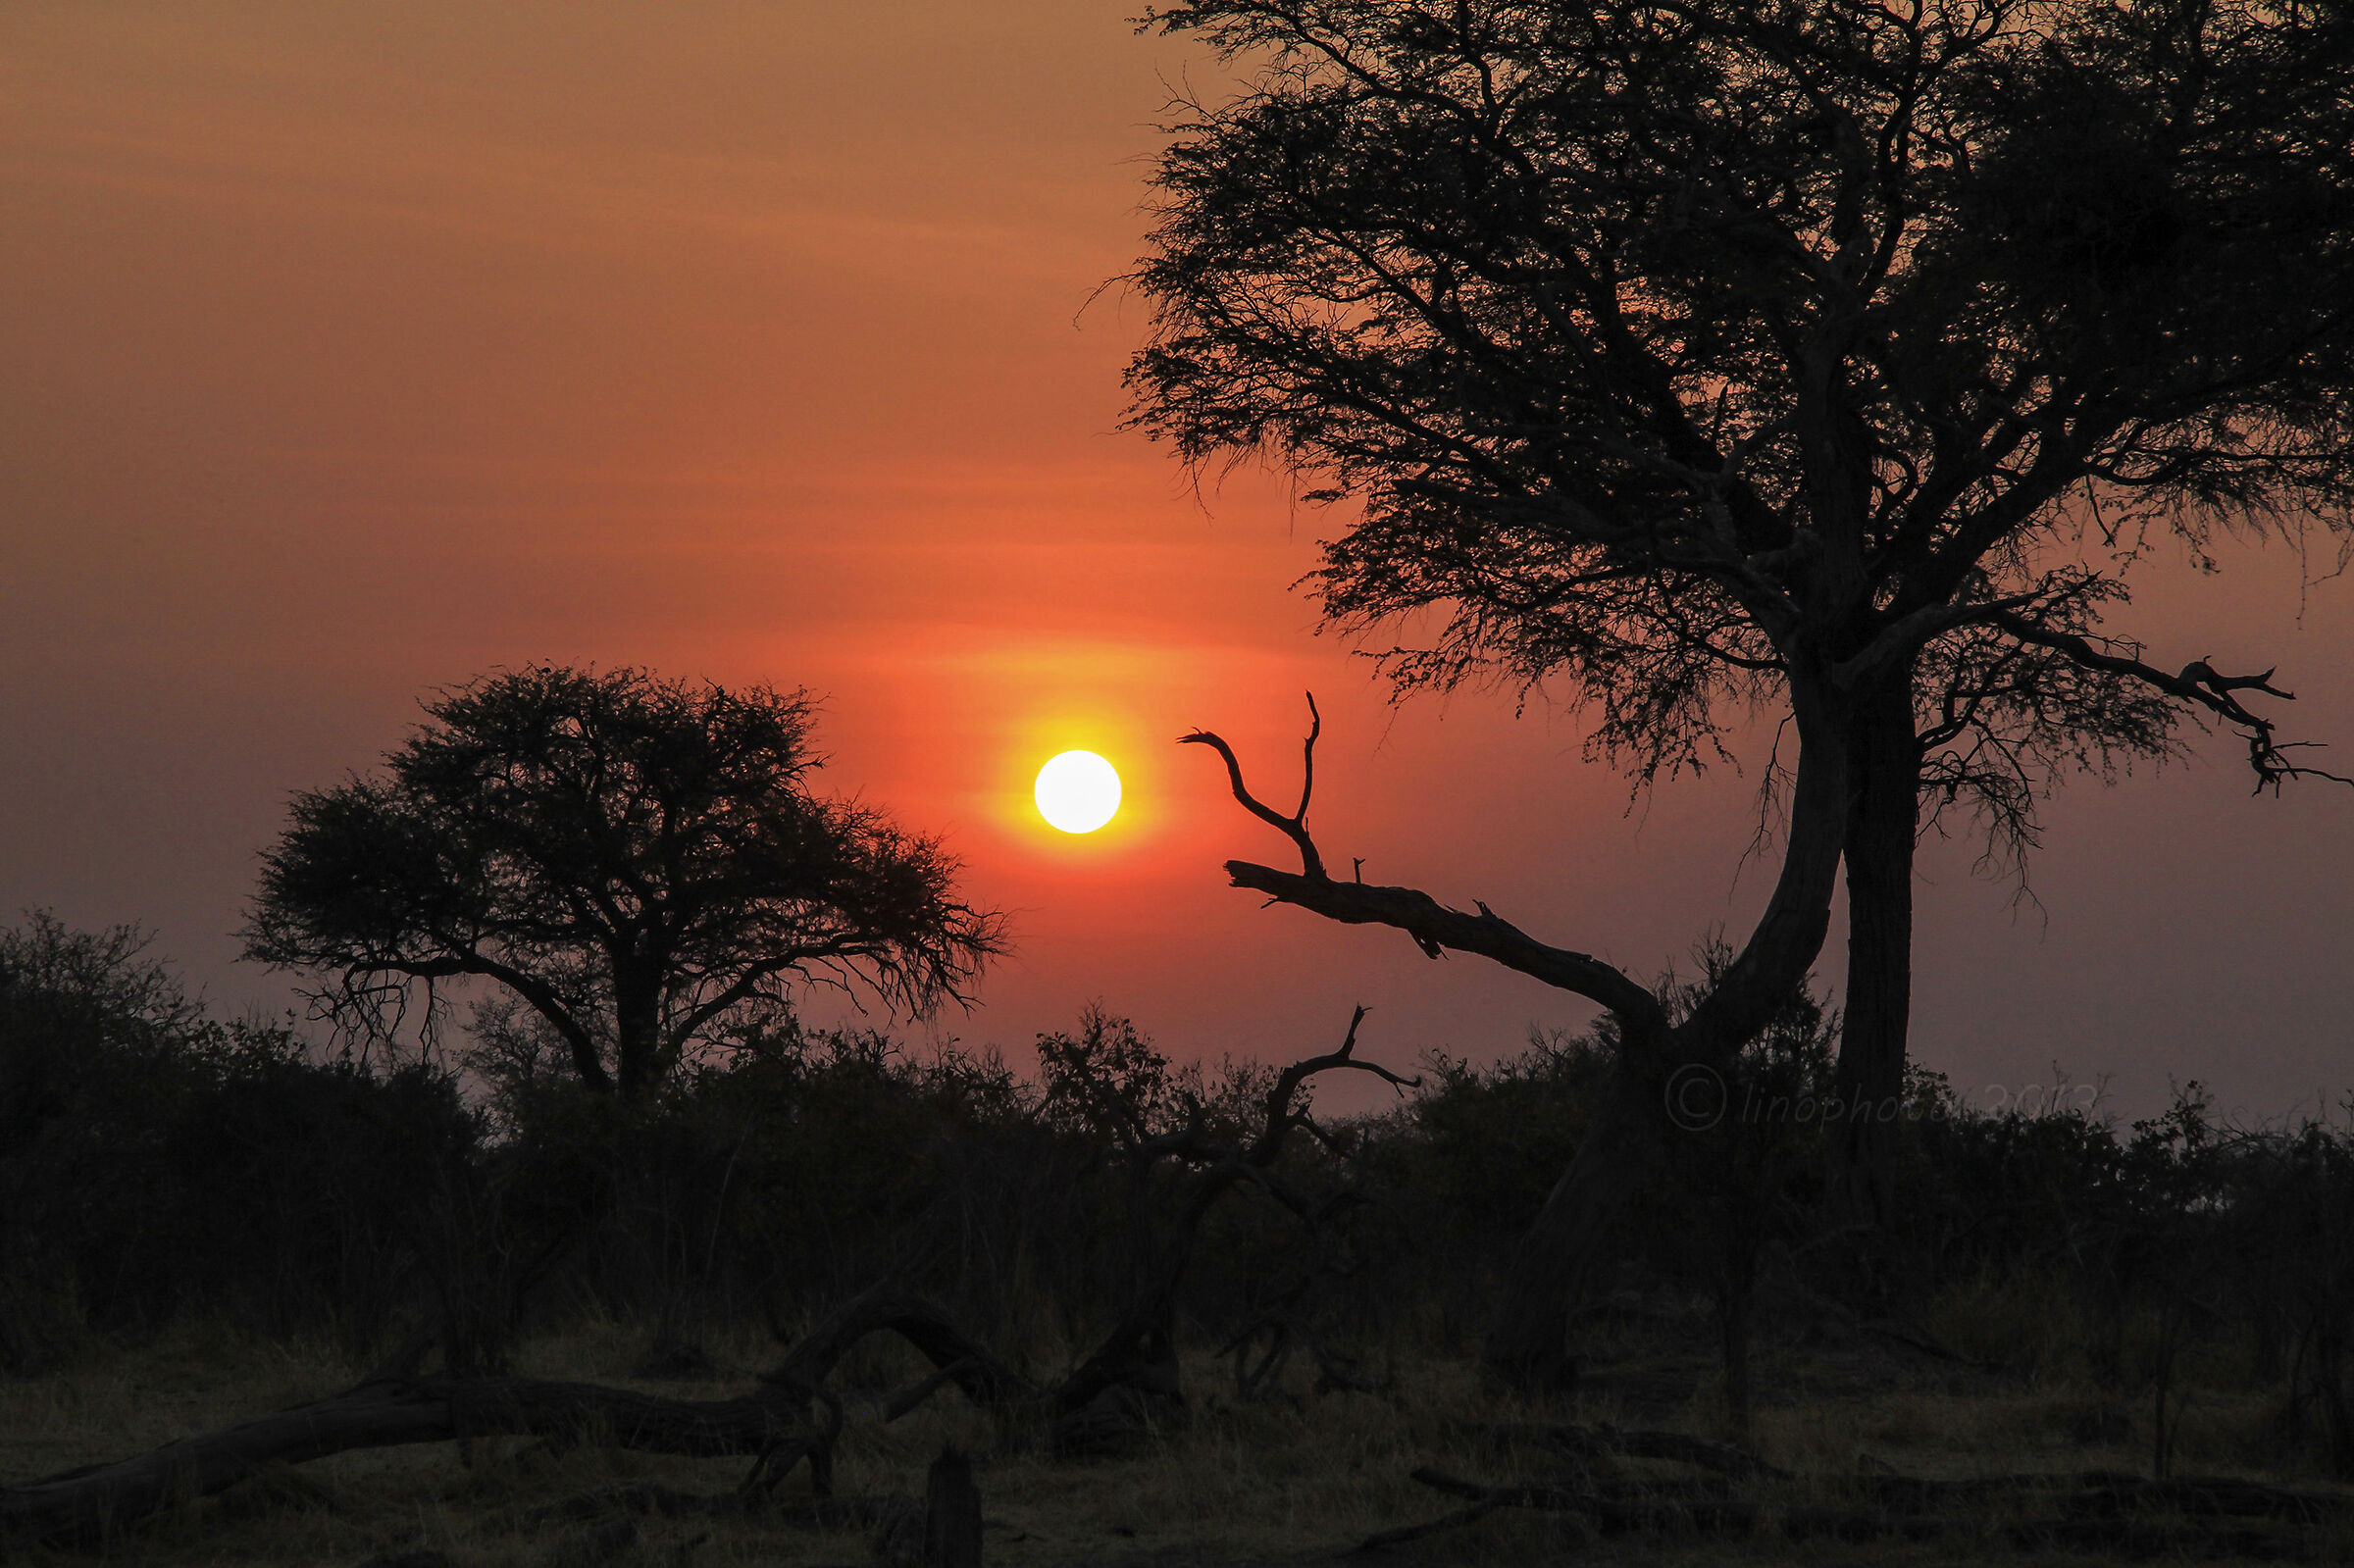 Waiting for the sun to go down in the bush - Botswana...